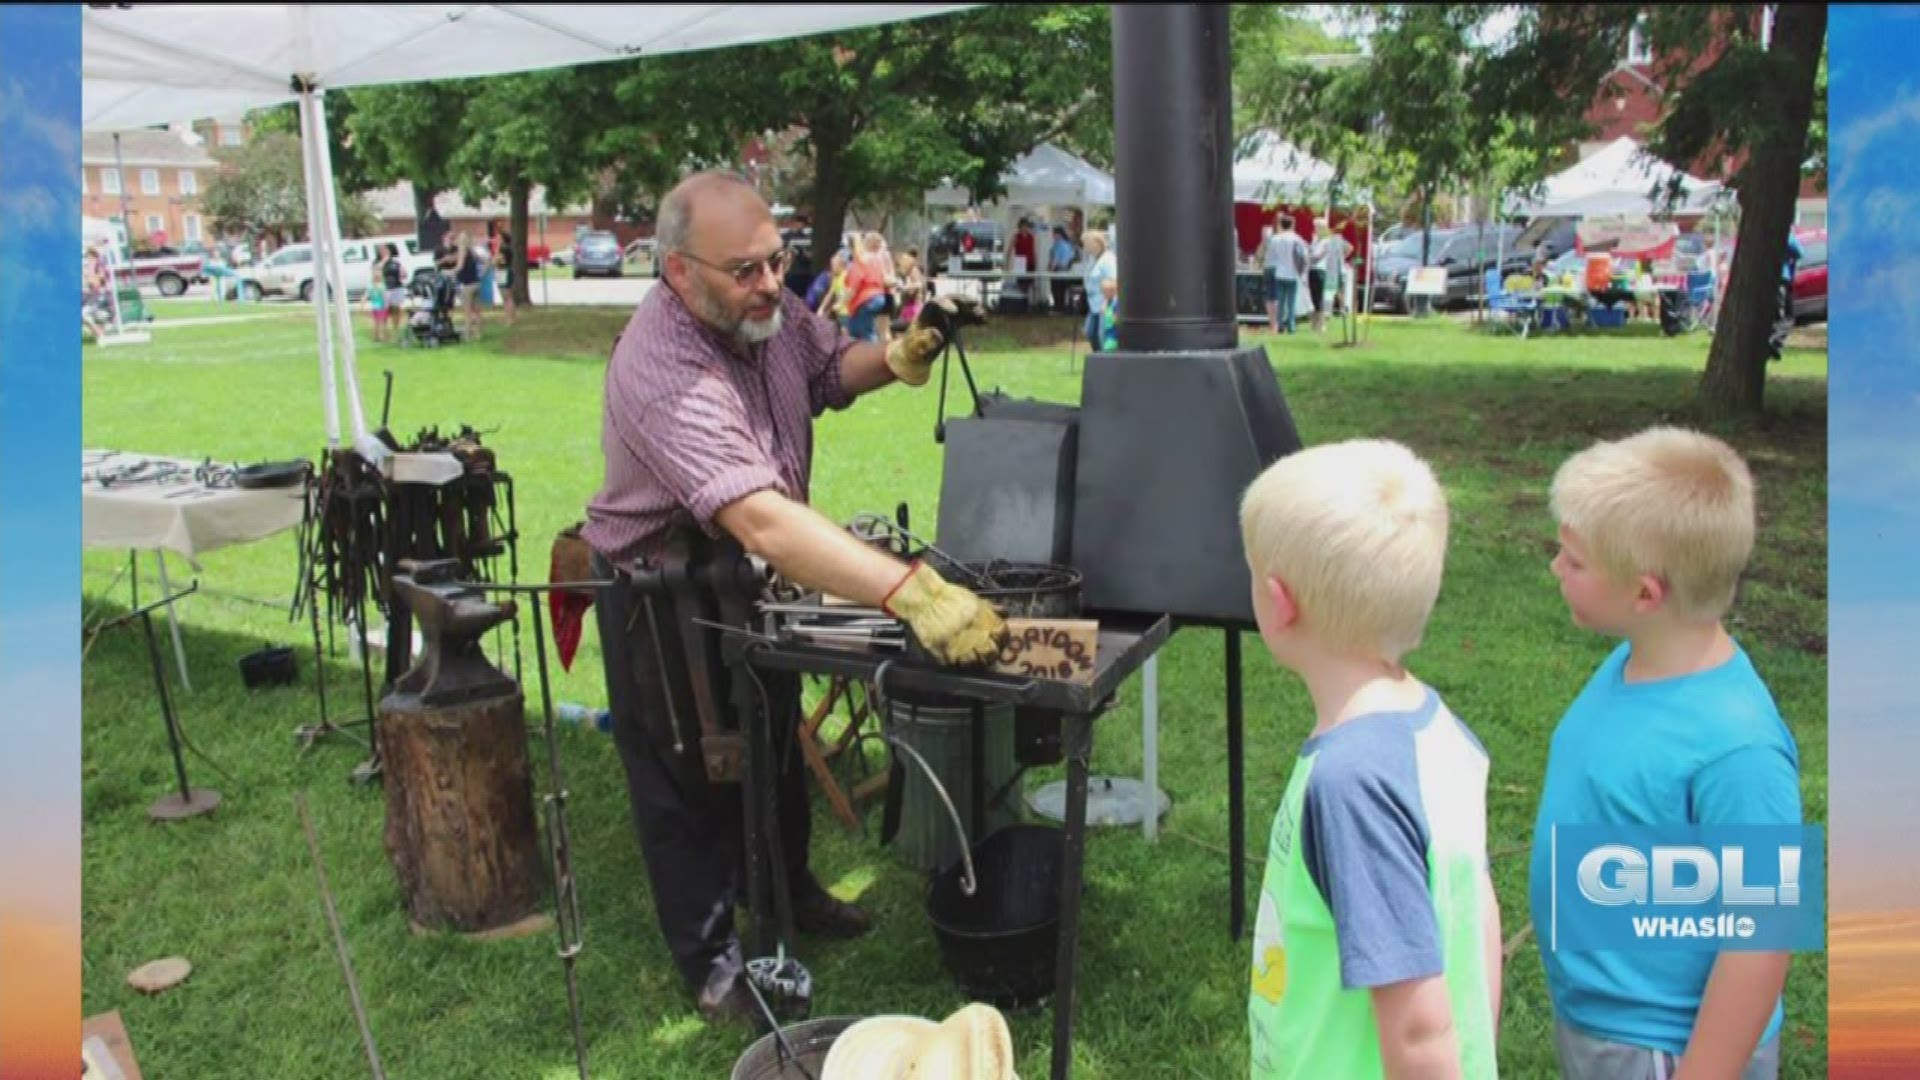 Take in the history and future of Corydon during Capital Day